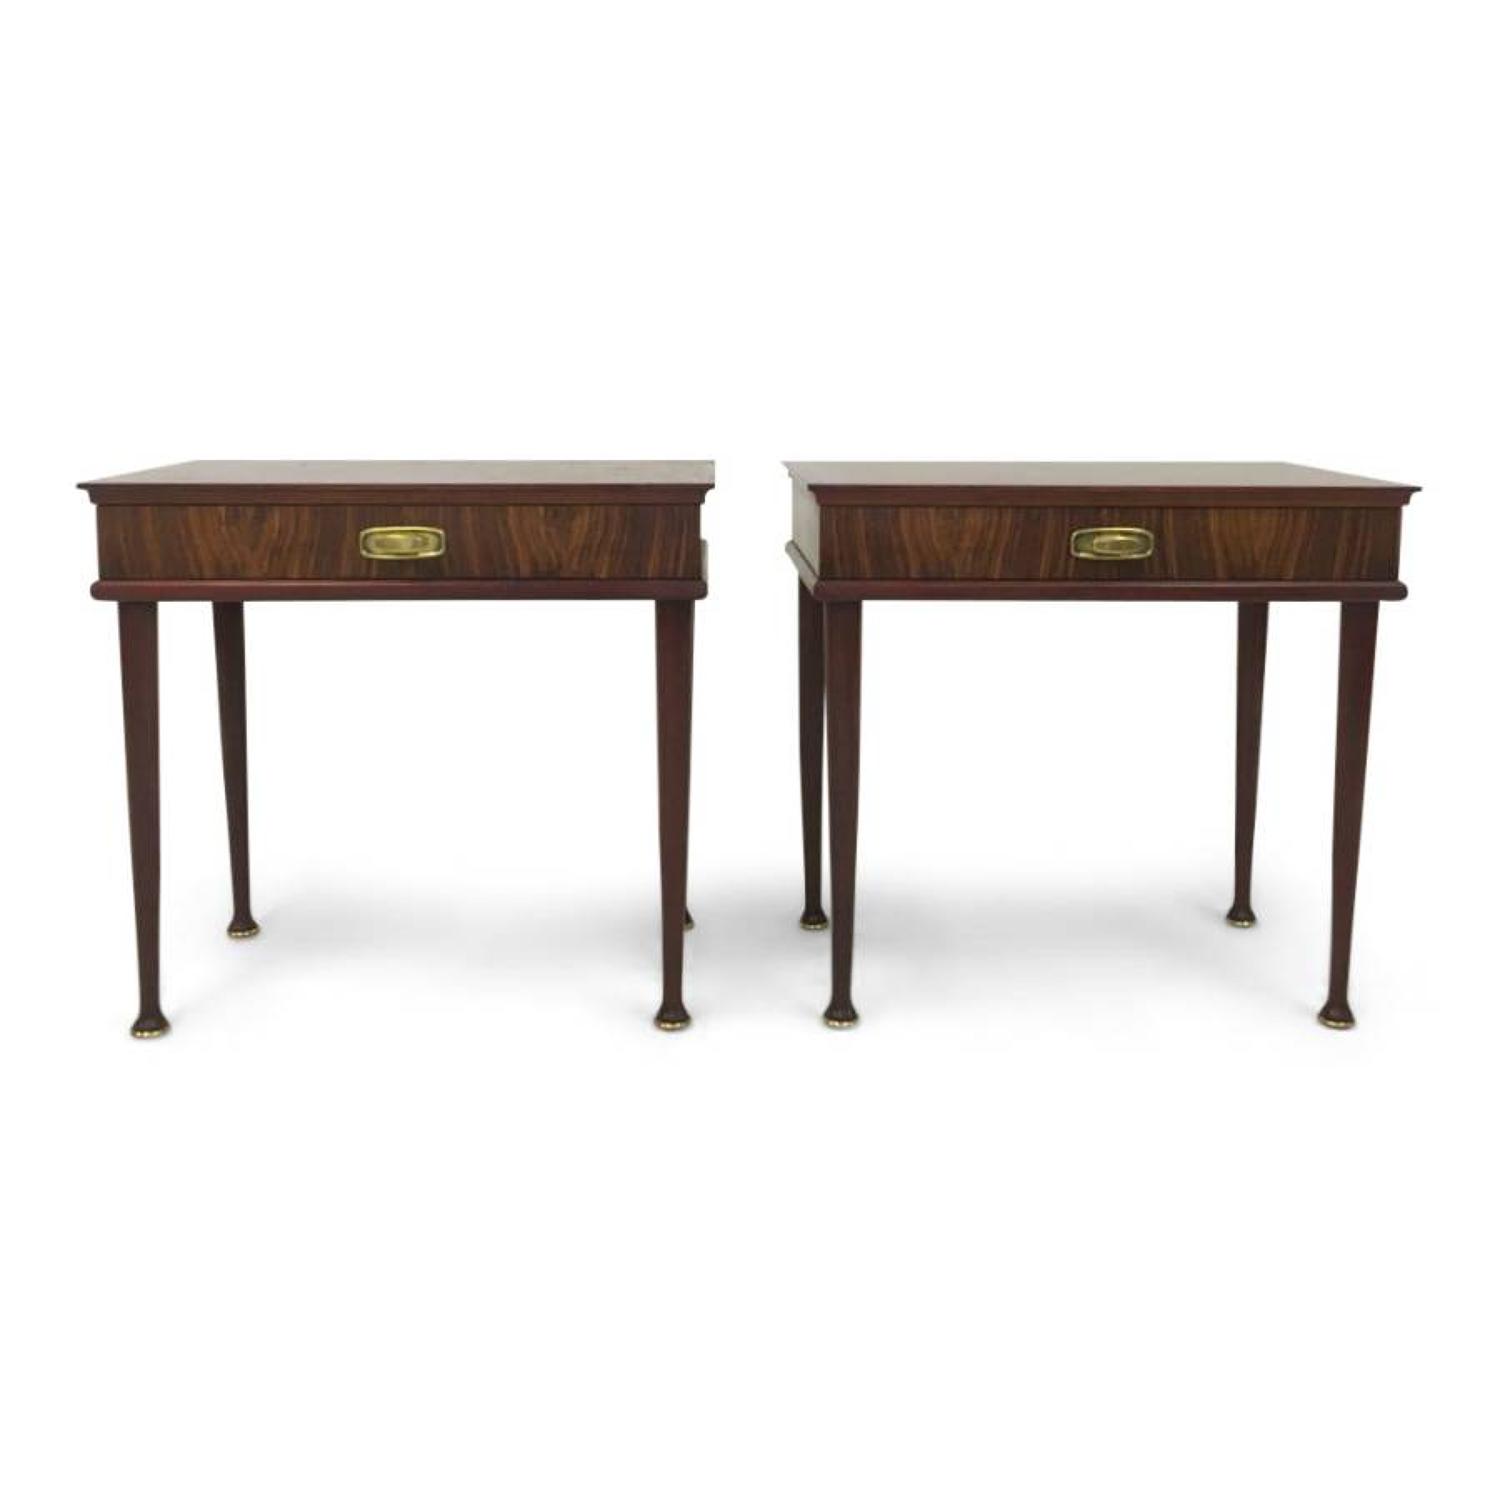 A pair of 1960s Italian rosewood bedside tables